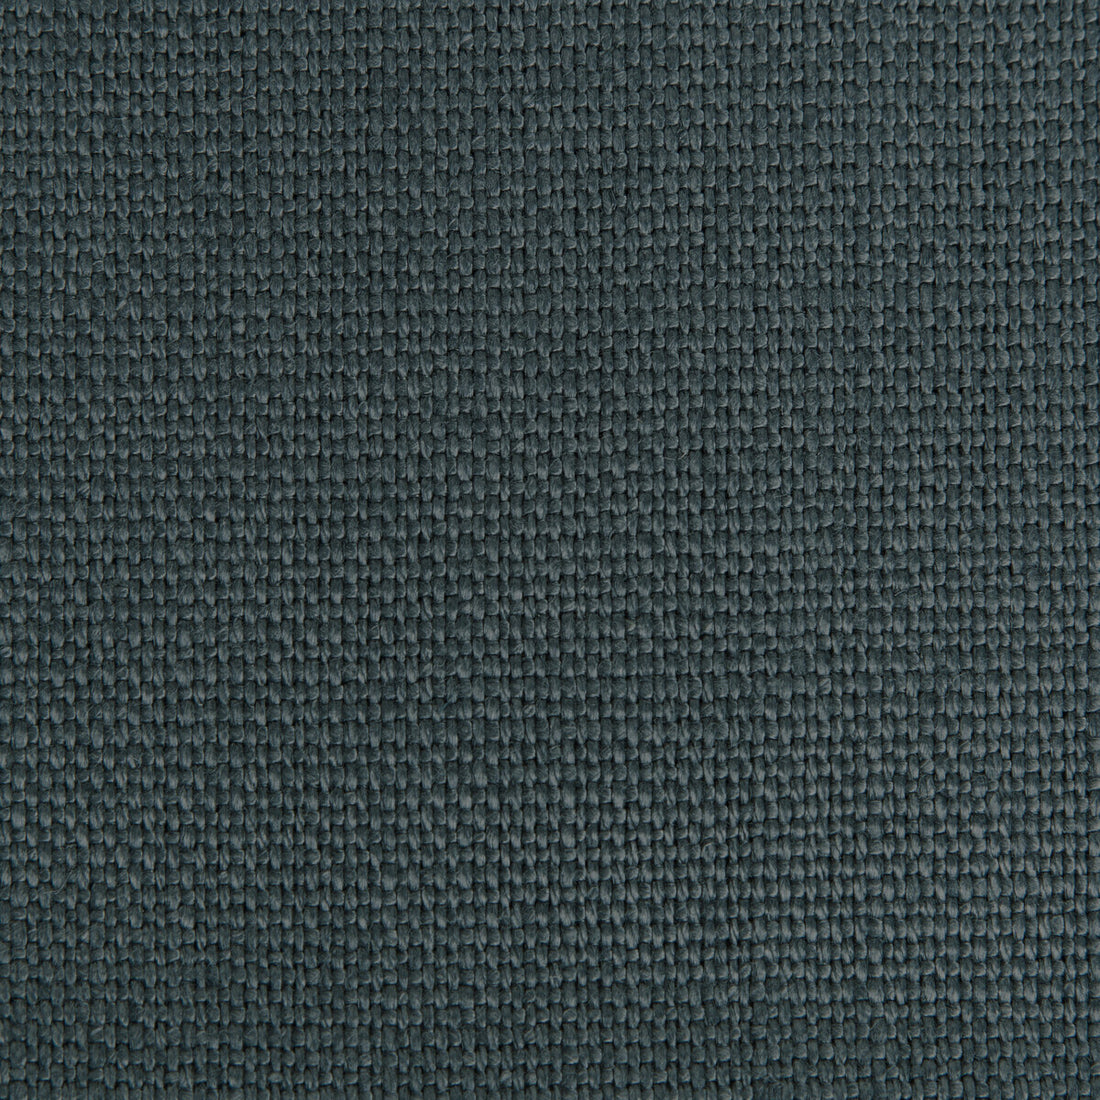 Stone Harbor fabric in moody blue color - pattern 27591.3535.0 - by Kravet Basics